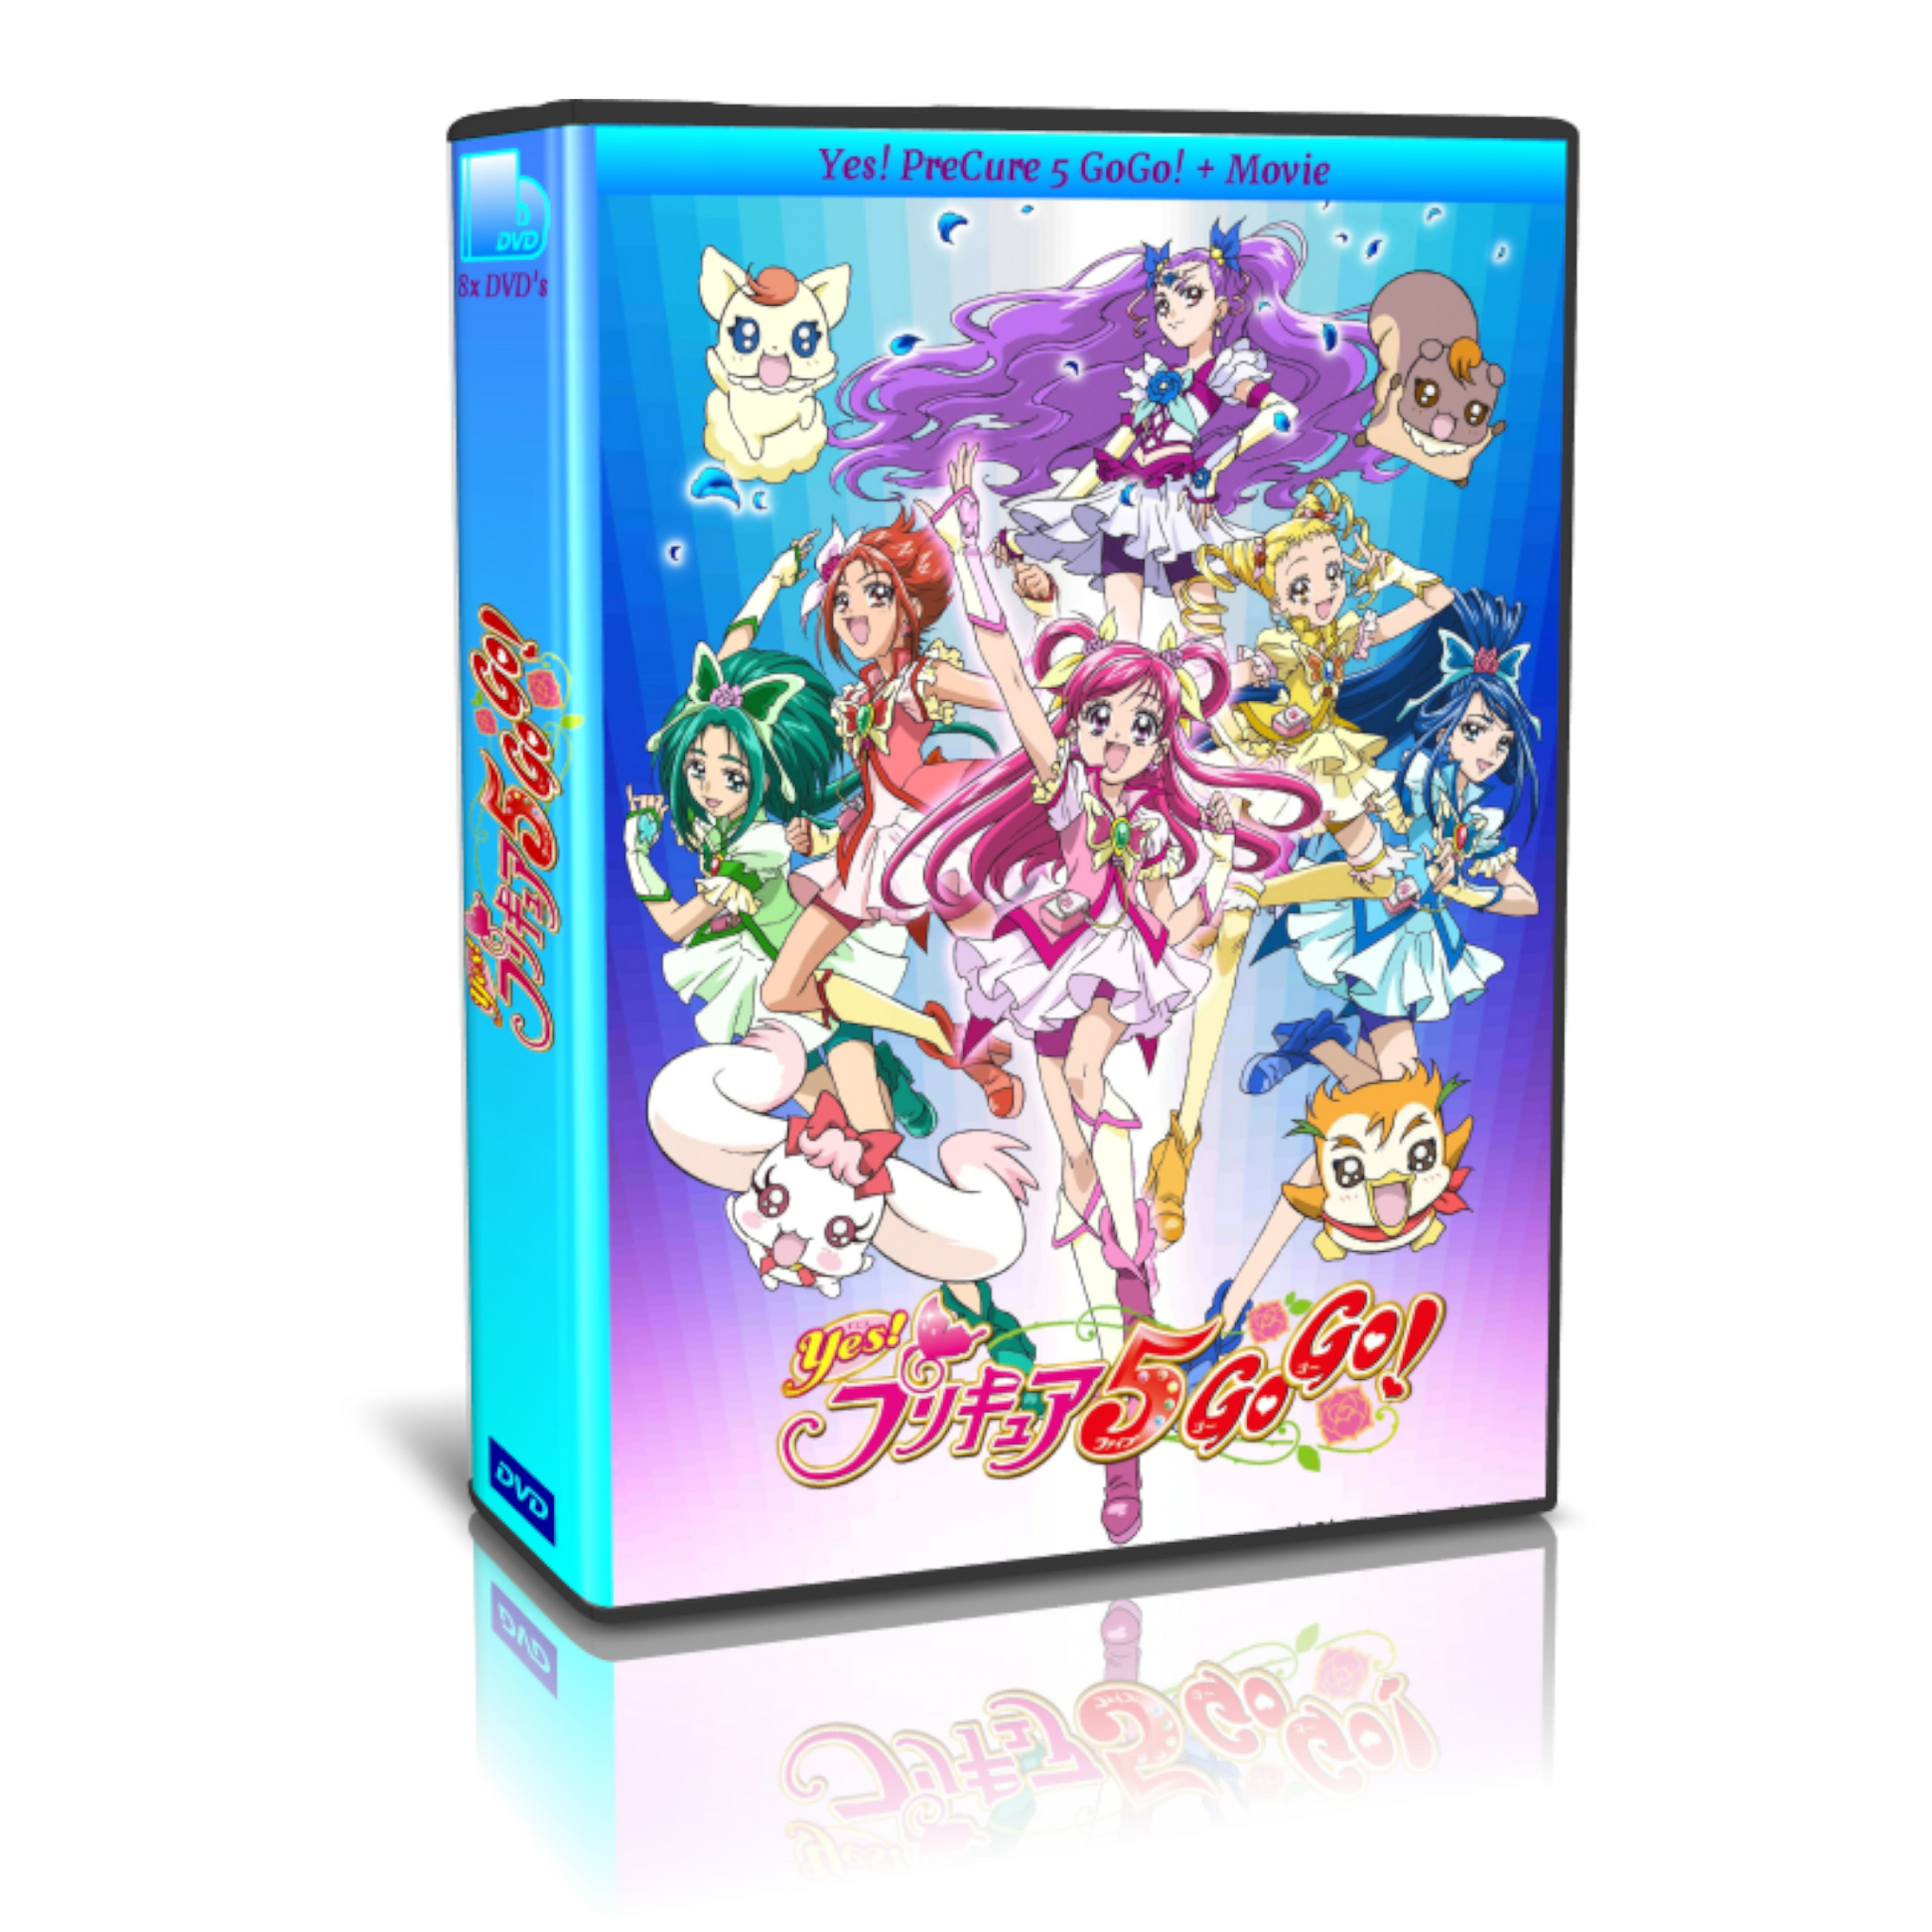 Yes! Pretty Cure 5 Go Go! Complete English Subs Series + Movie DVD 